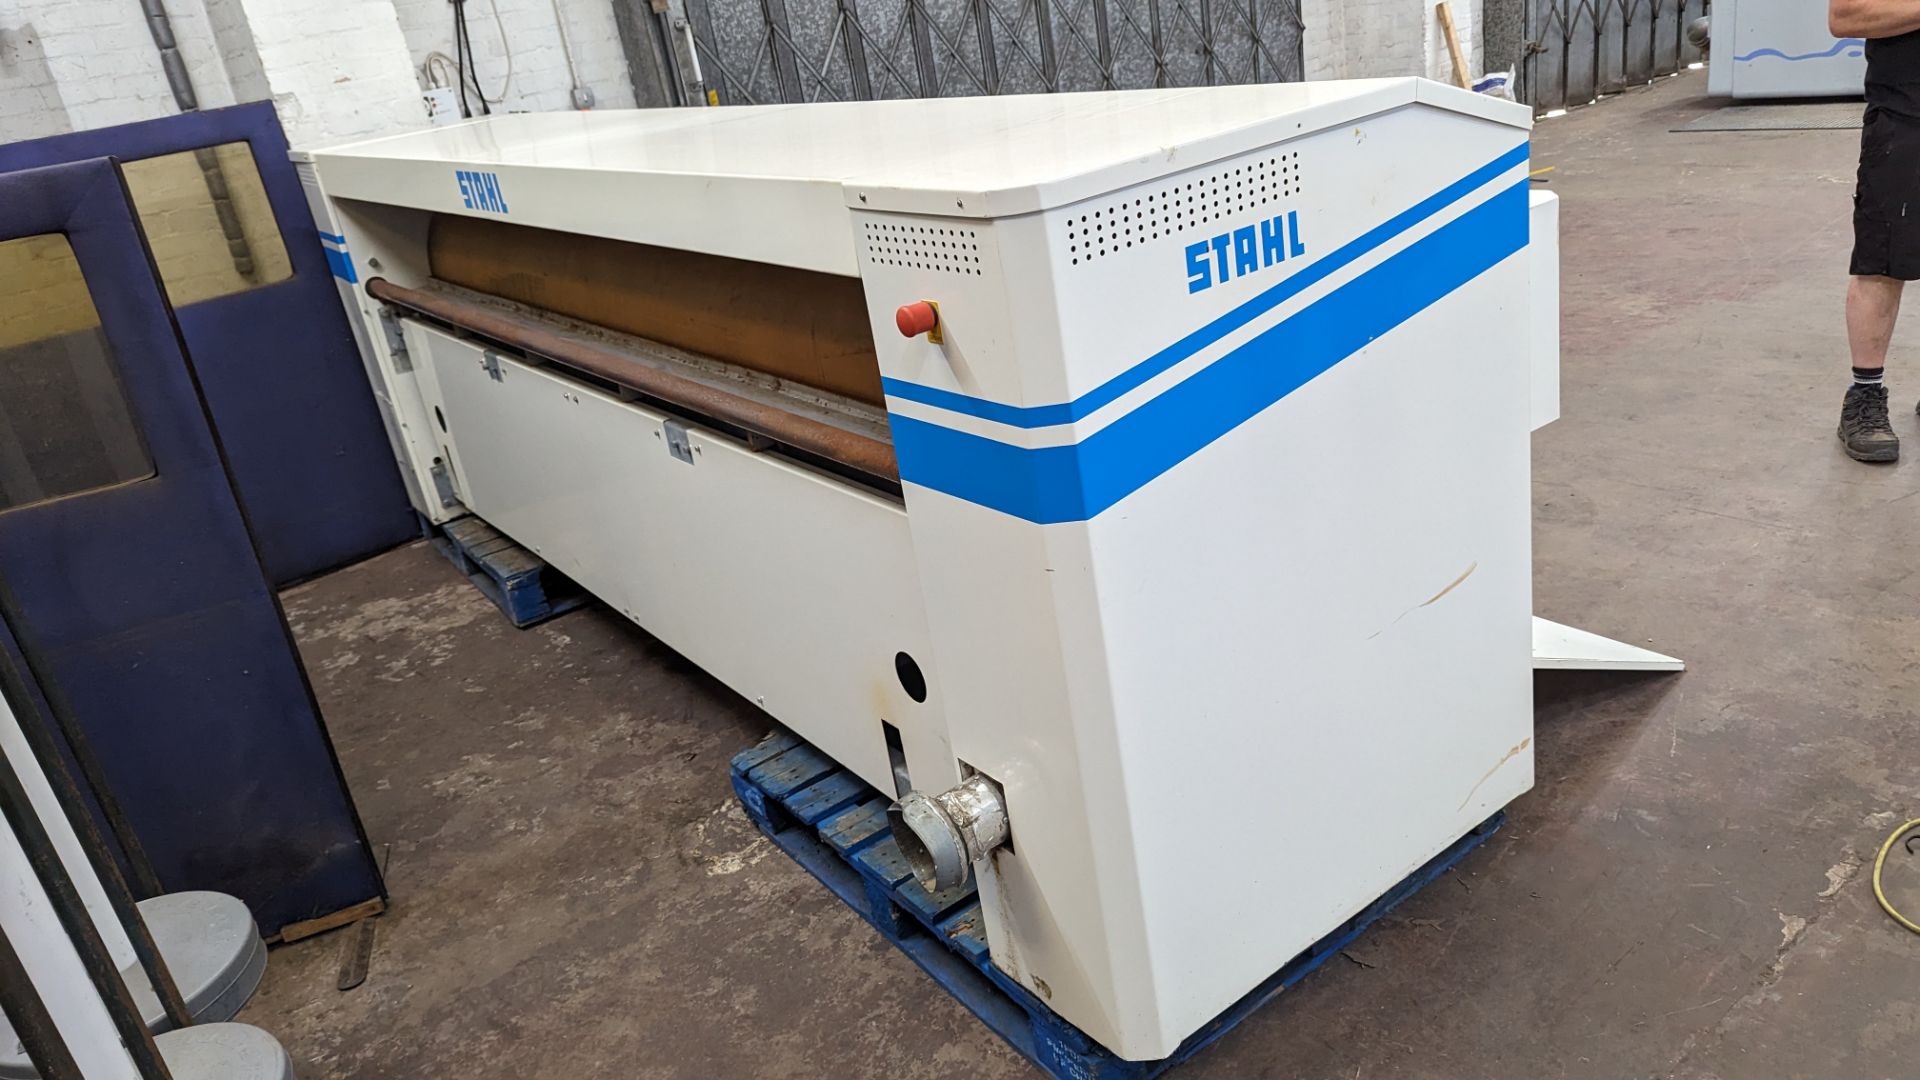 2017 Stahl flatwork ironer Super Chest ironing system, type MC 600/3000 D - Image 19 of 20